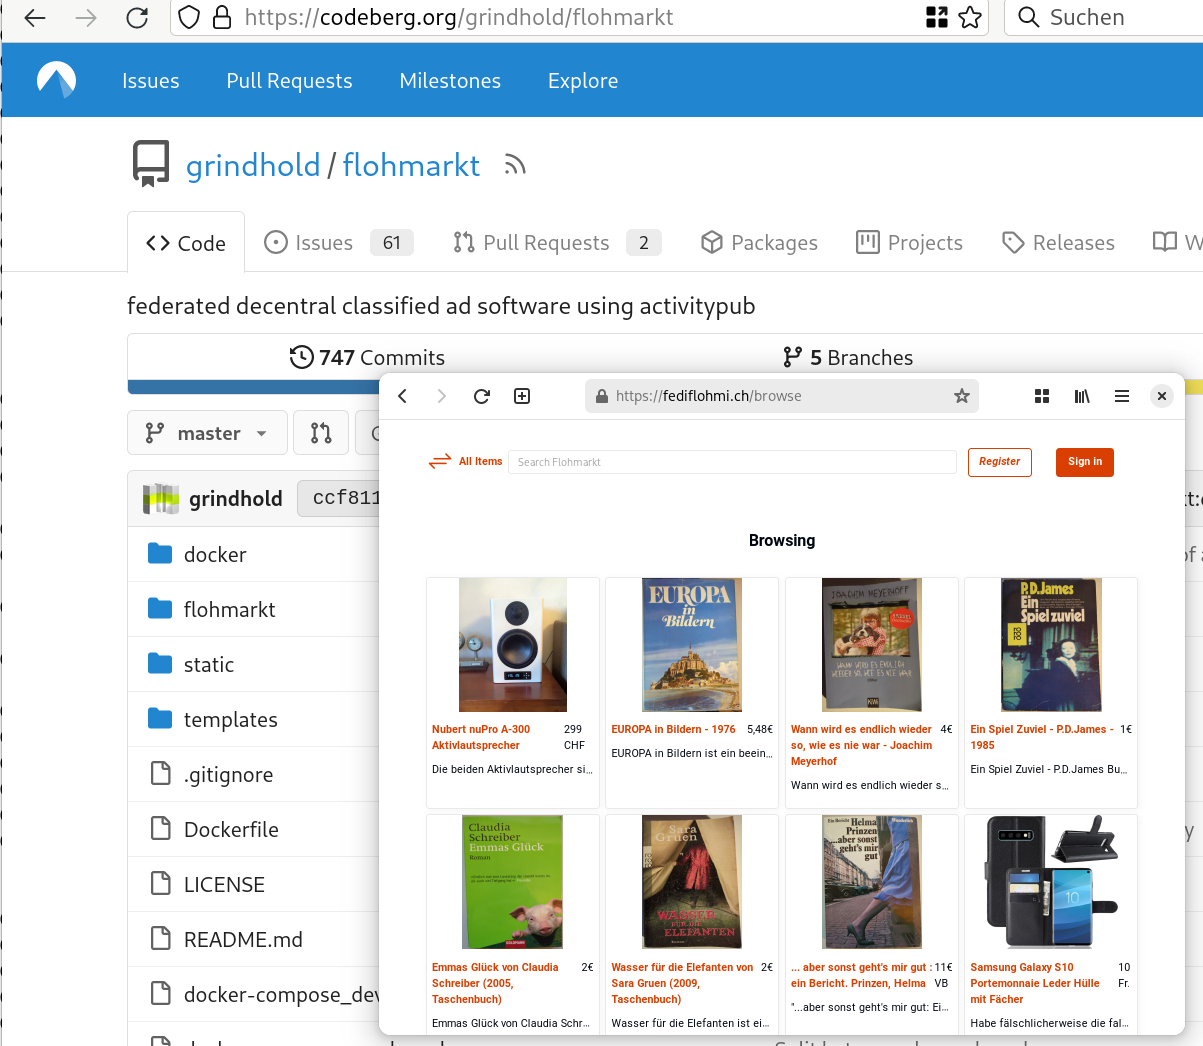 screenshot showing a flohmarkt in a browser in front of another browser with the flohmarkt repository opened.